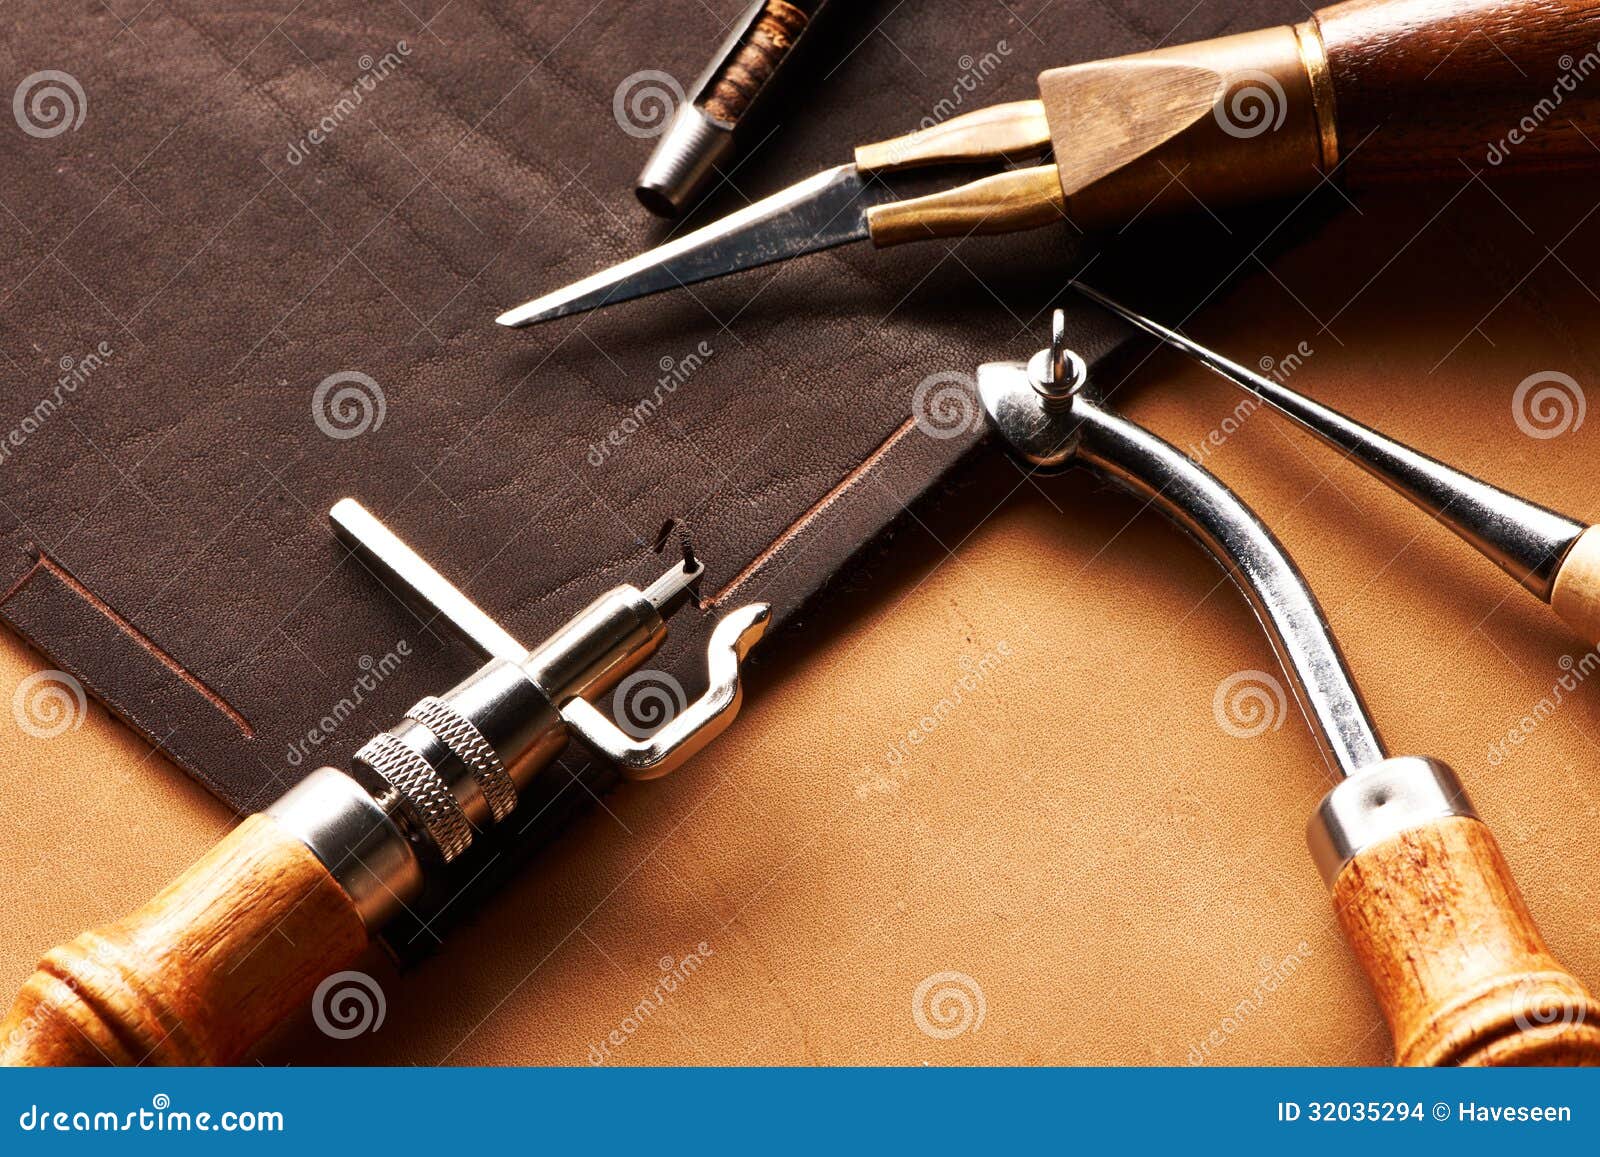 Leather crafting tools stock photo. Image of creation - 32035294